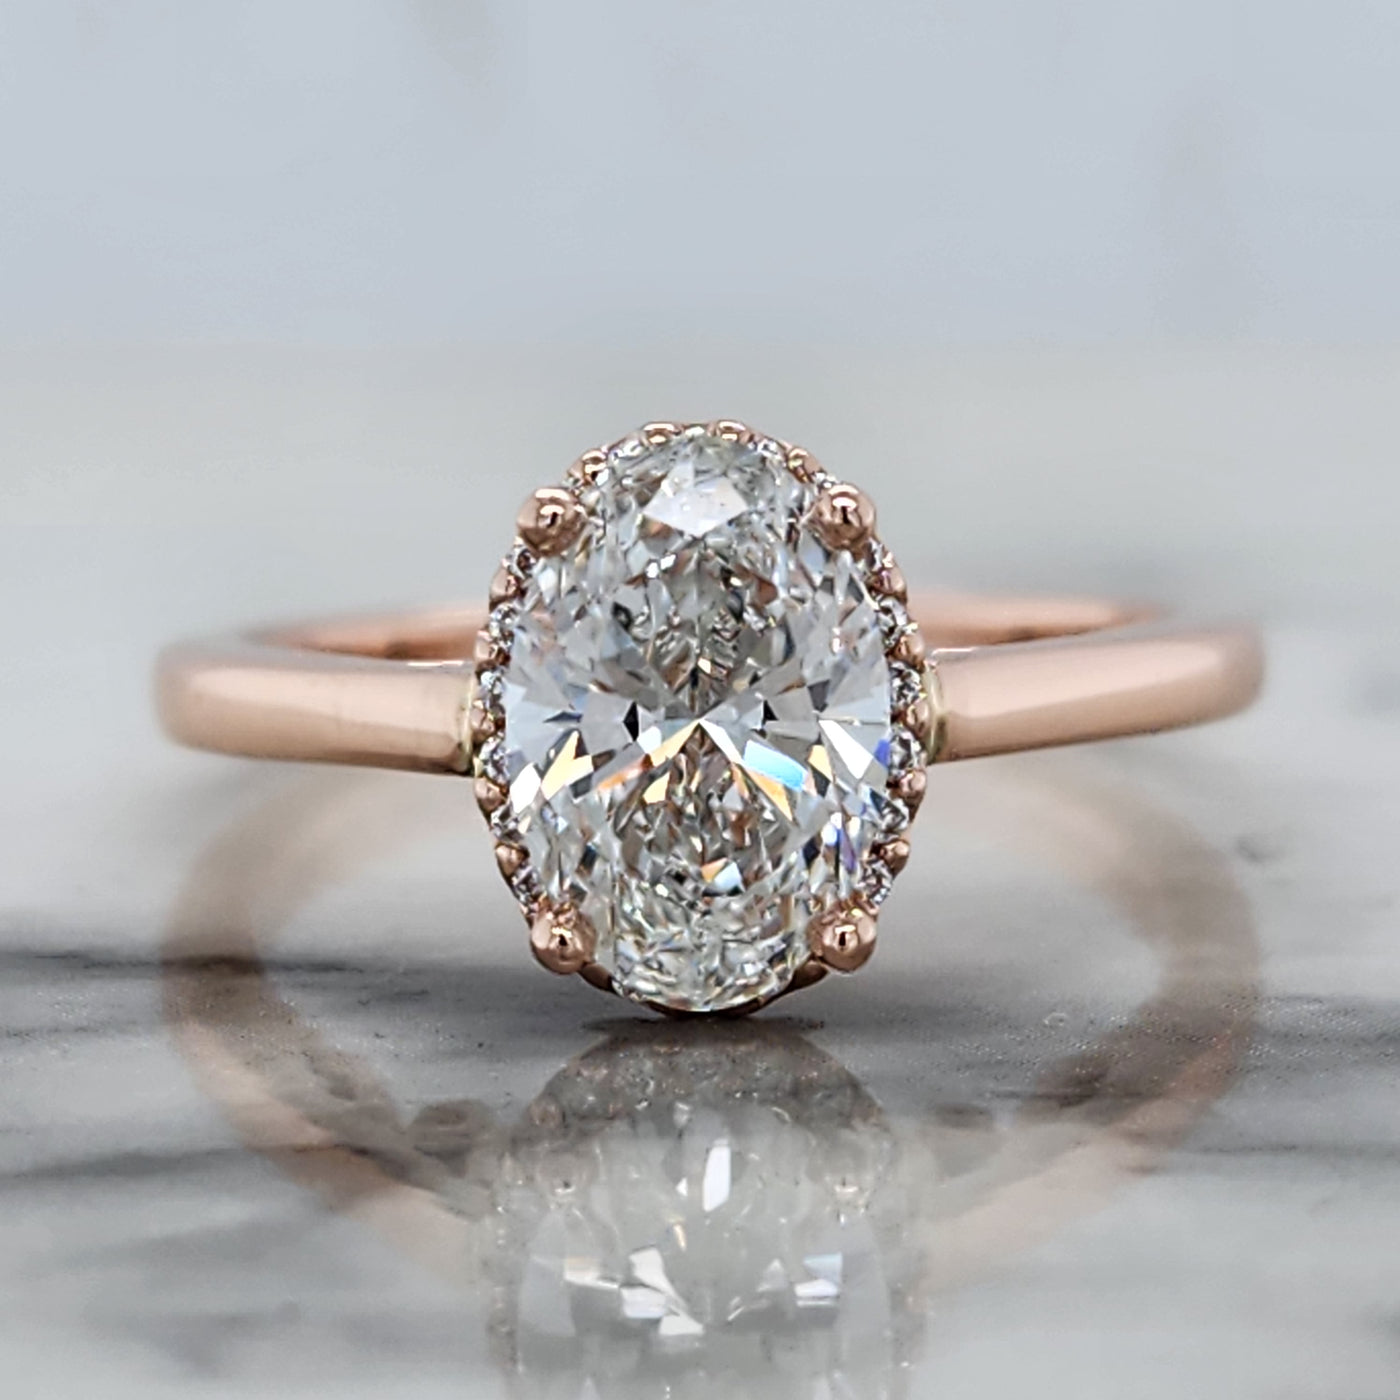 Custom Rose Gold Engagement Ring With Oval Center Stone and Diamond Halo